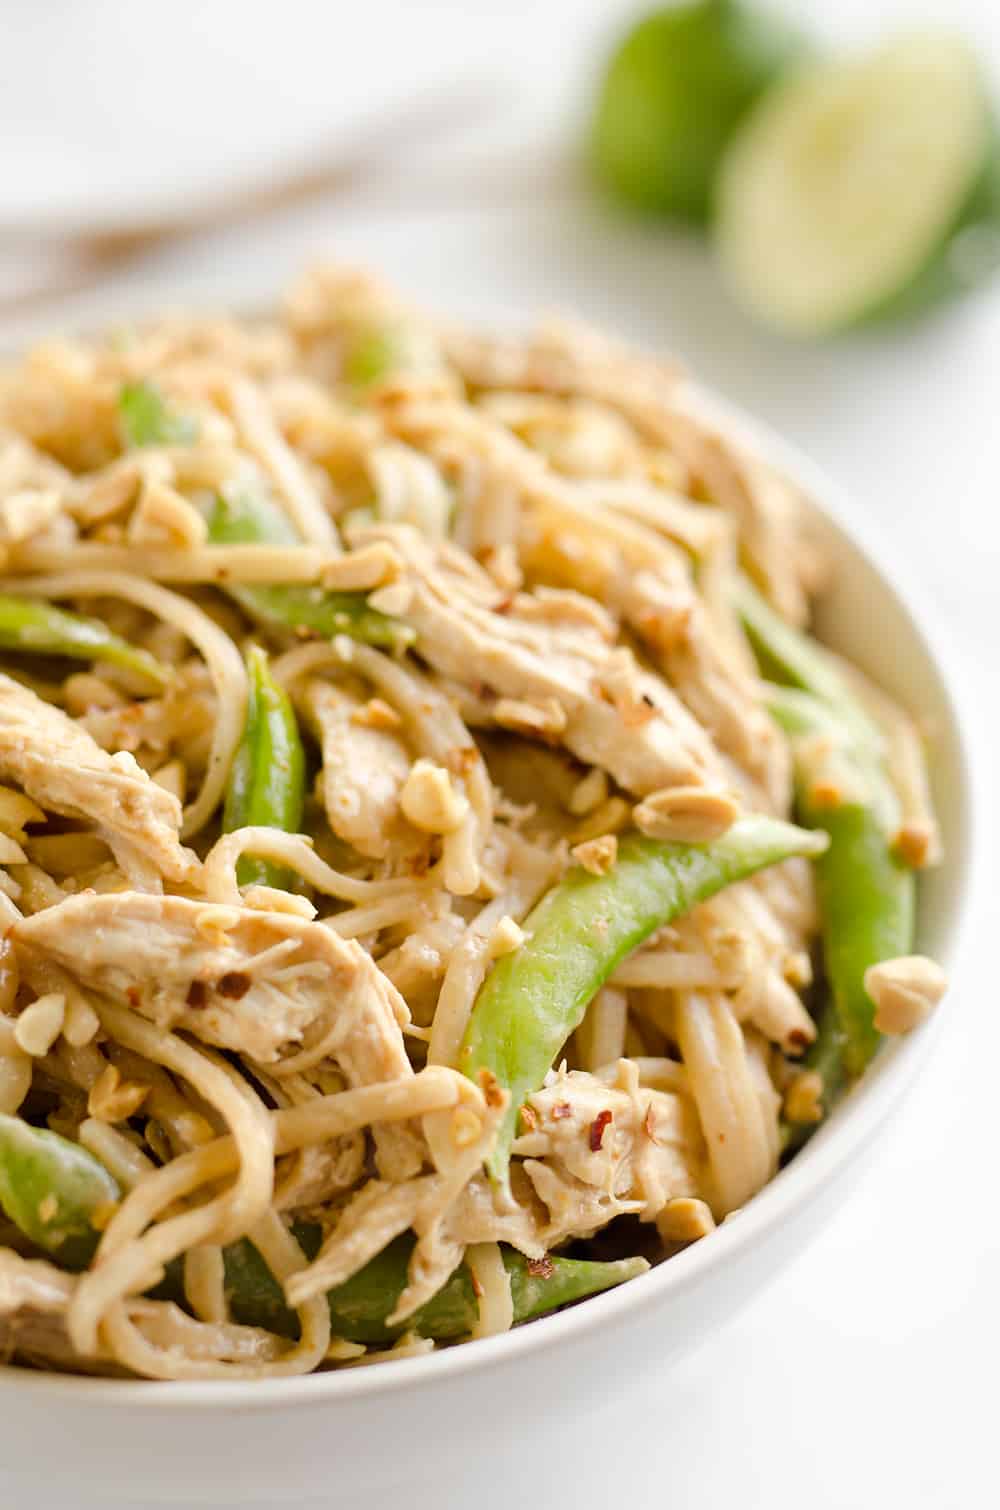 Pressure Cooker Thai Peanut Chicken & Noodles is the best 30 minute Pressure Cooker recipe you will find! Lean chicken breasts are cooked in a homemade spicy Thai peanut sauce and finished off with rice noodles and peas for an easy and healthy one-pot meal made in your Instant Pot. 